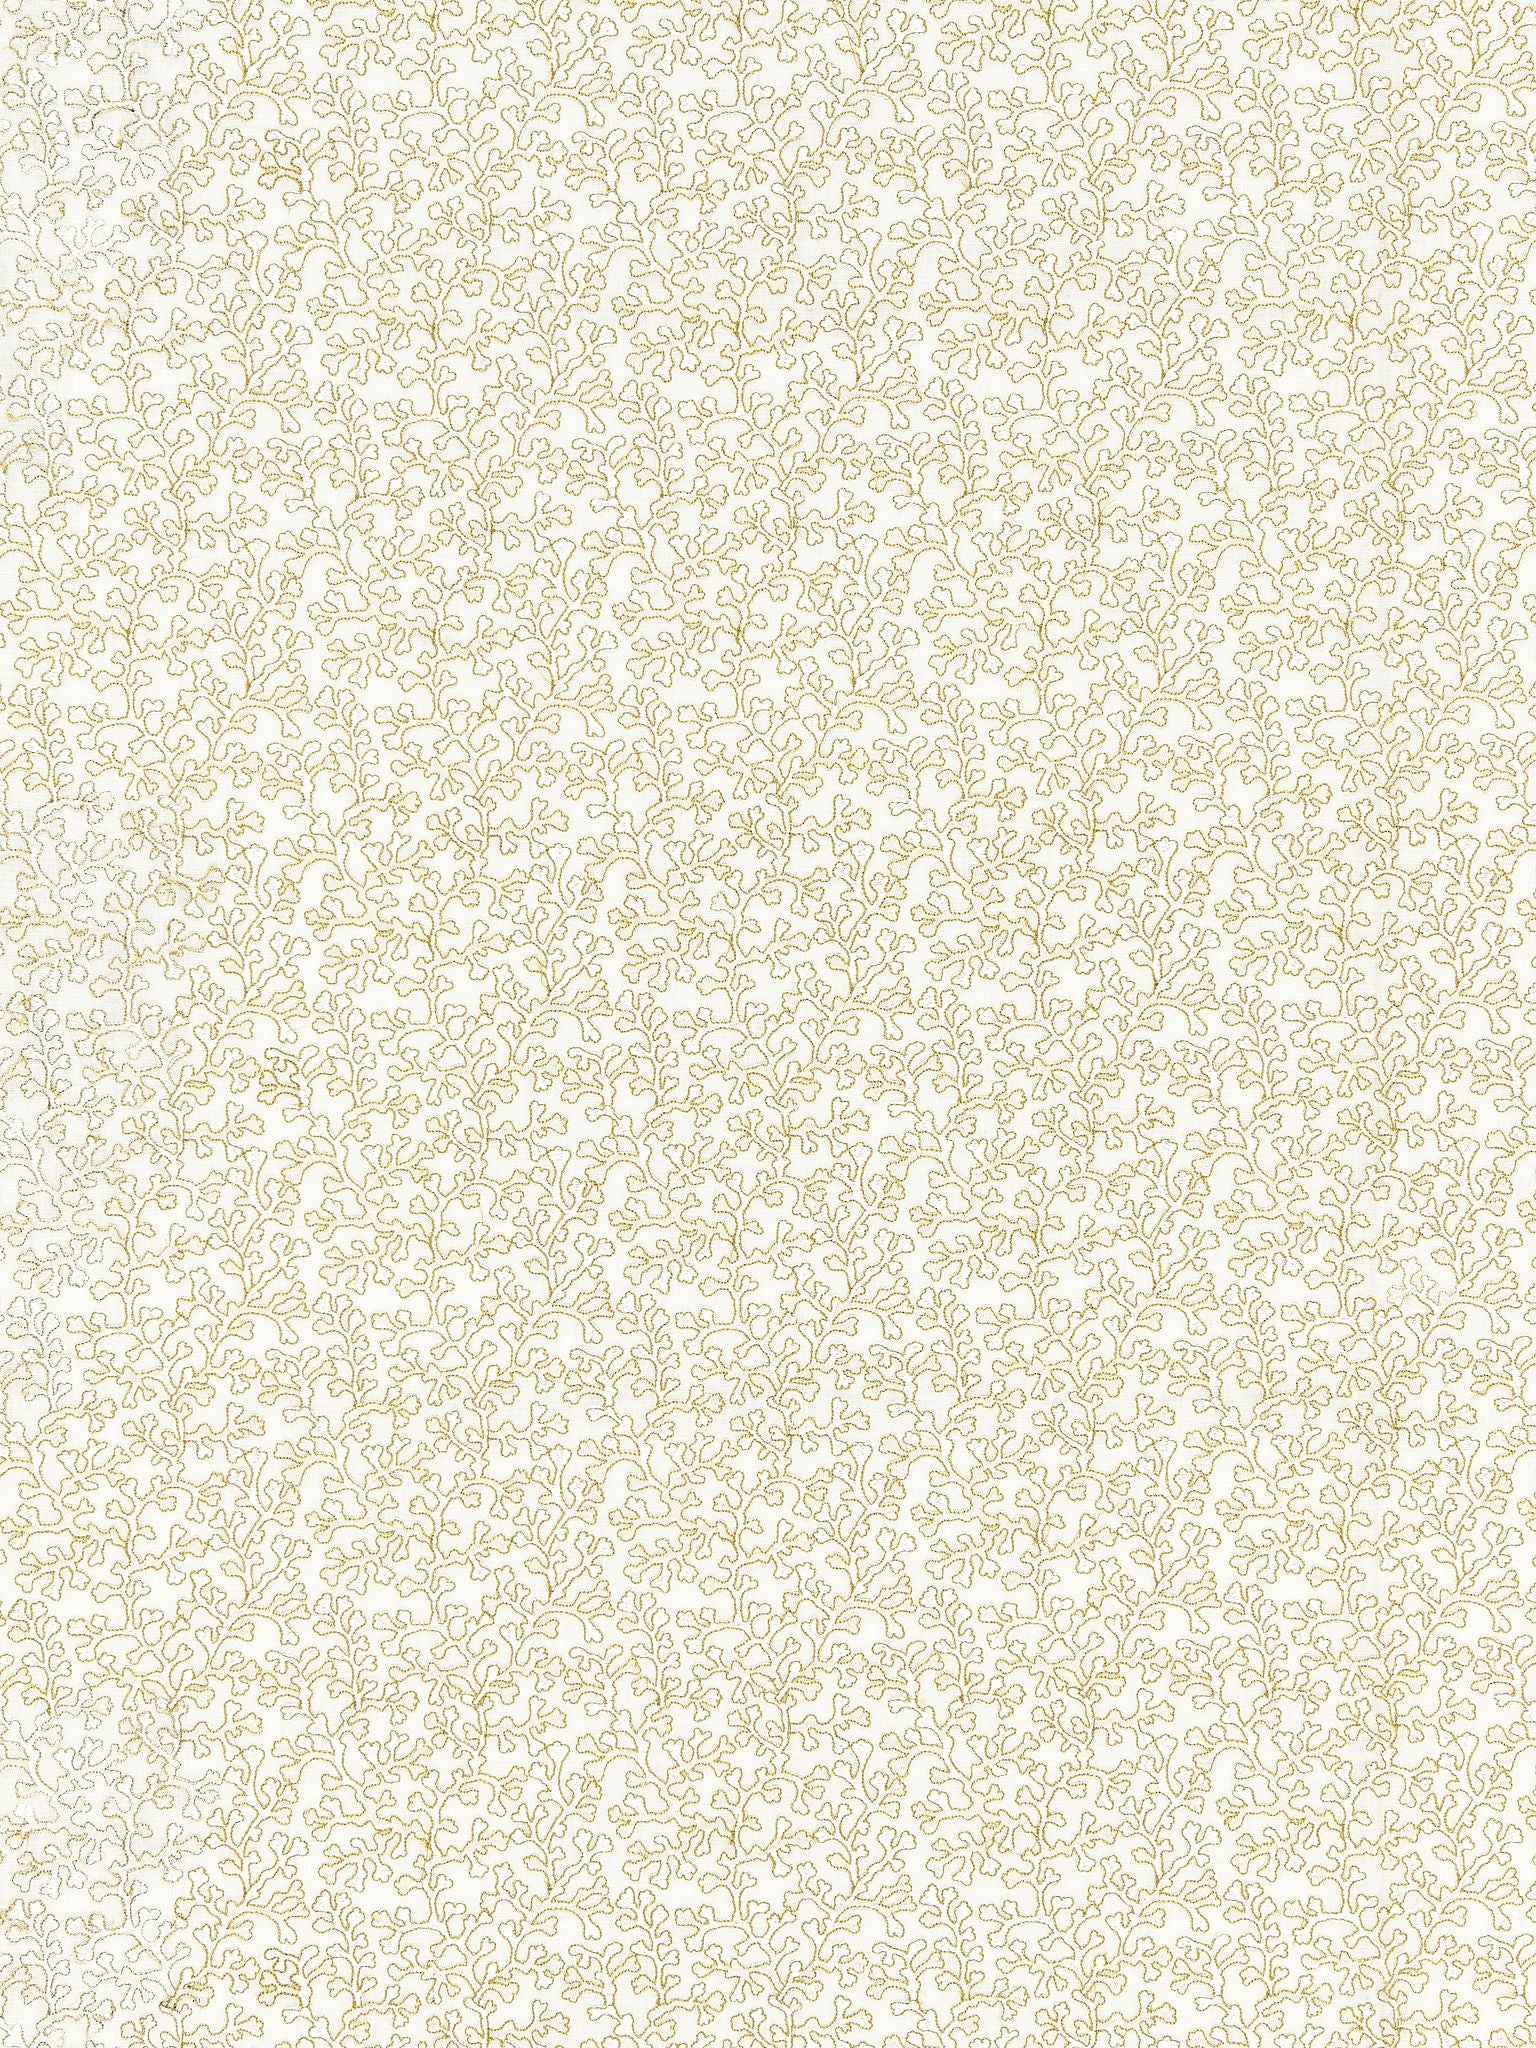 Hele Bay fabric in ivory color - pattern number ZS 00036949 - by Scalamandre in the Old World Weavers collection